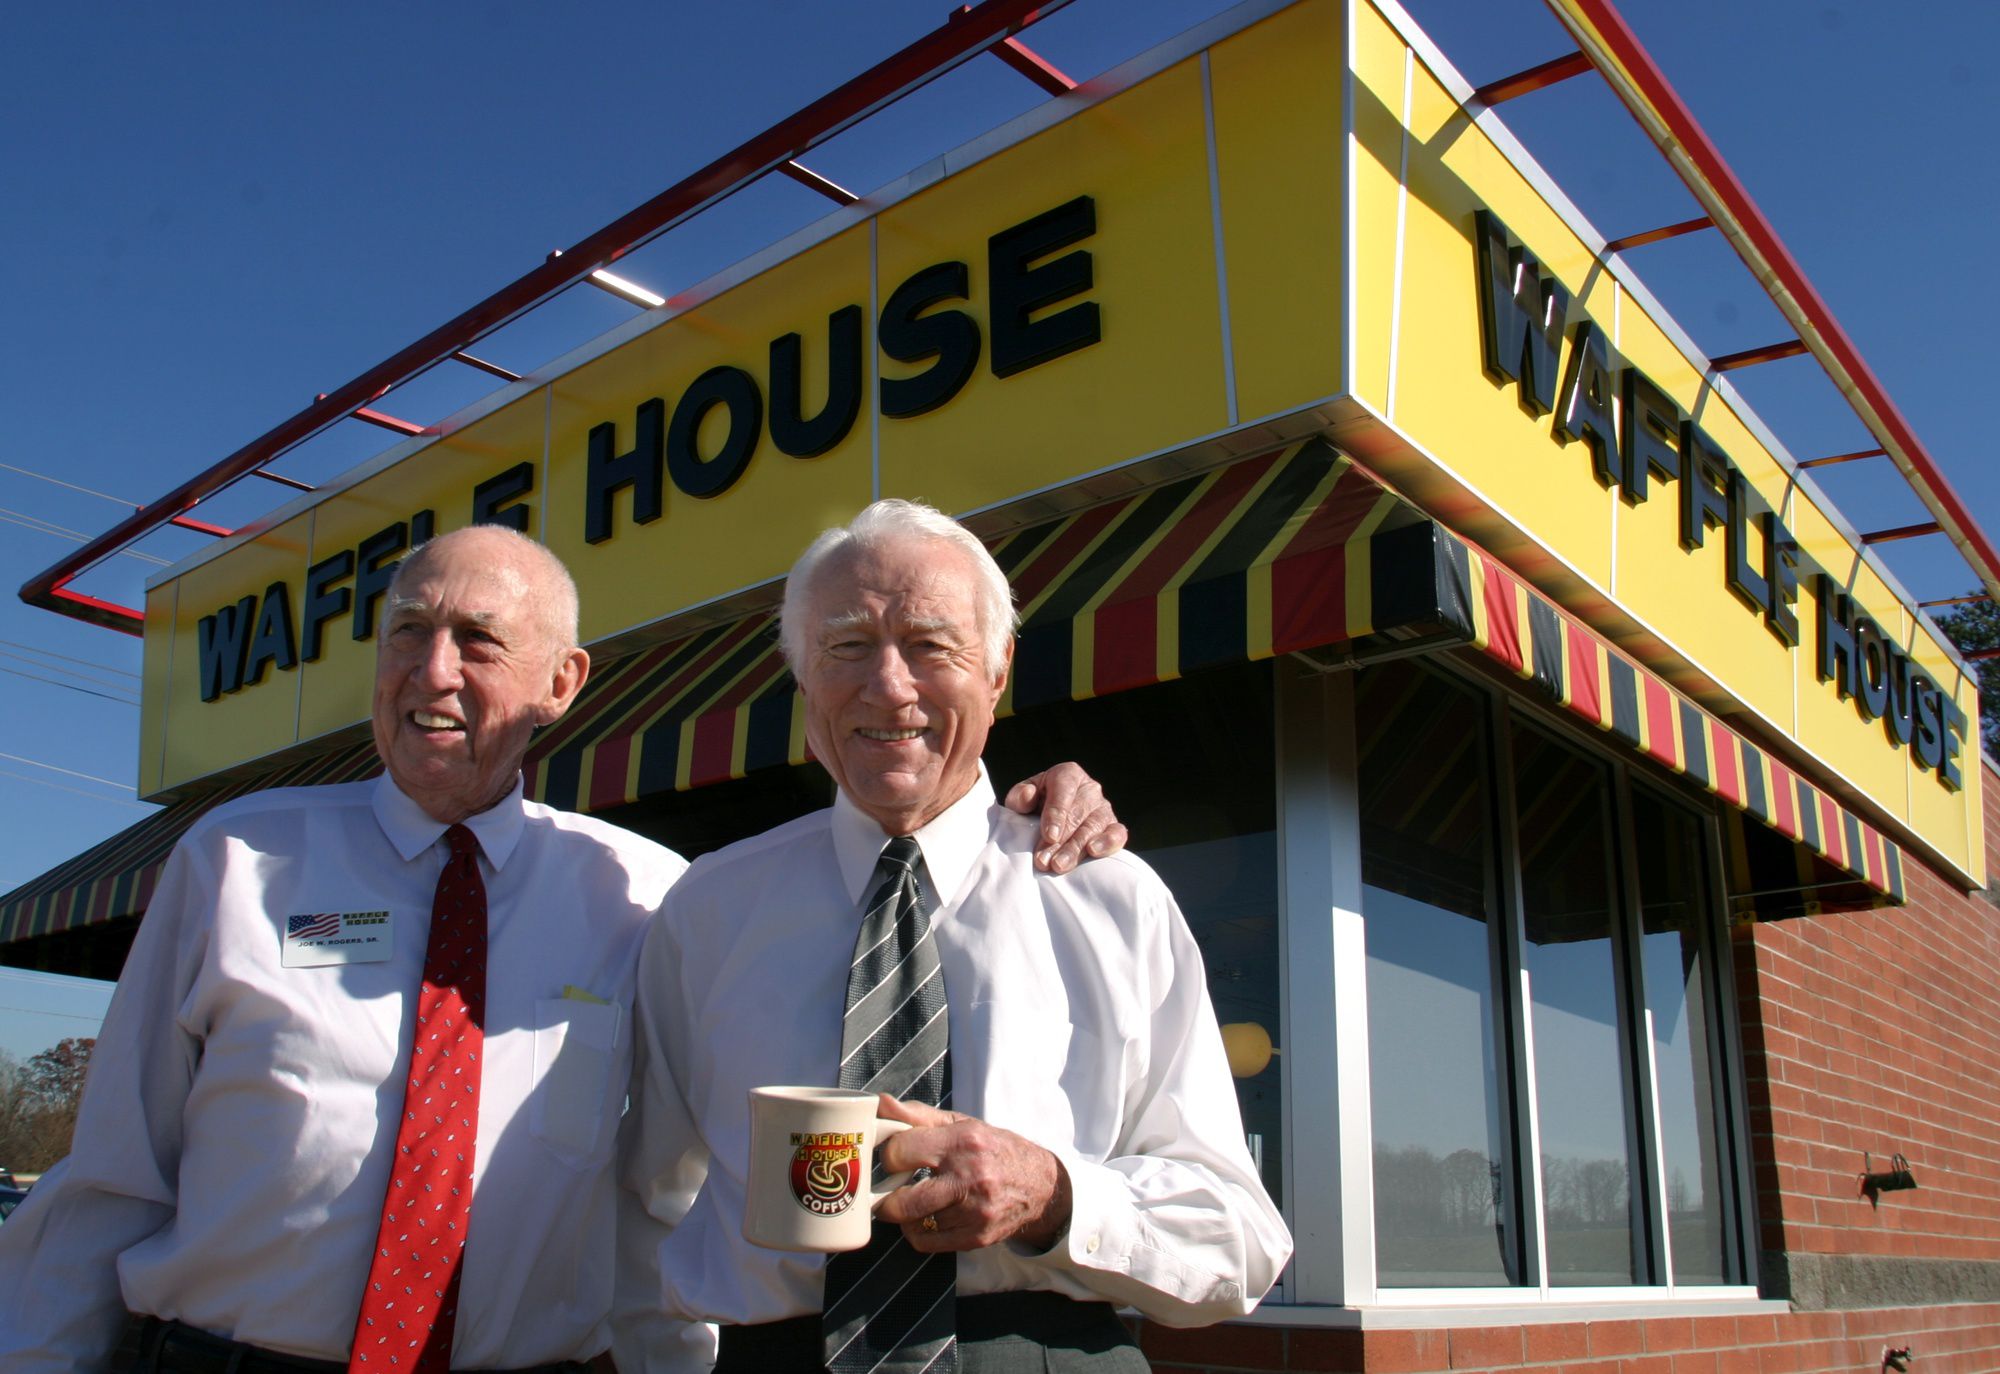 Waffle House - Who's in need of some Waffle House coffee this morning?